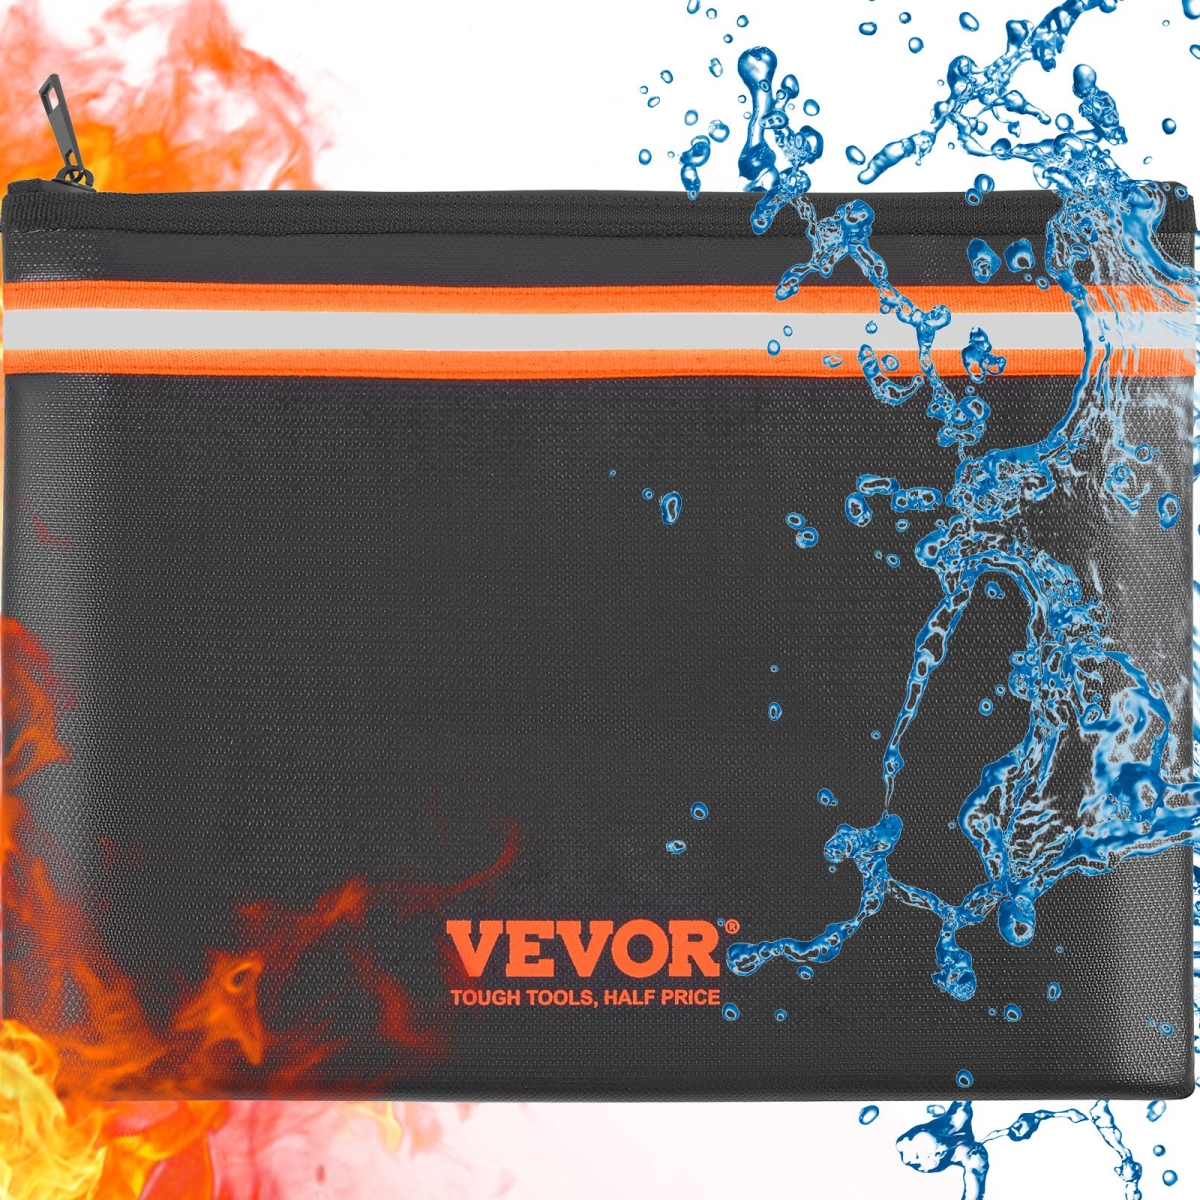 Picture of Vevor DSFHWJB134101RREFV0 13.4 x 10 in. Fireproof Document Bag 2000 deg F Waterproof Money Safe Storage Pouch with Zipper